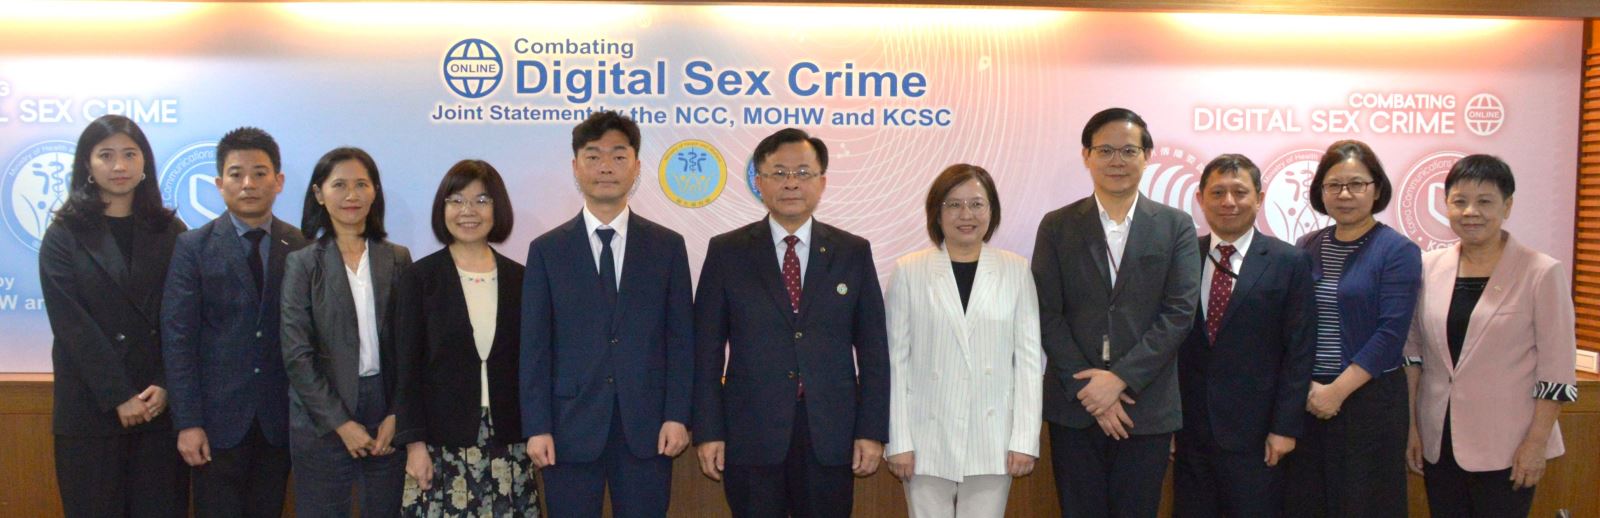 Photo 4: Group photo of NCC Chairperson Chen Yaw-Shyang (center), MOHW Deputy Minister Lee Li-Feng (5th right), KCSC Head of Digital Sex Crime Content Review Bureau Lee Dong-su (5th left), KCSC Manager Park So-young (1st left), KCSC Division Director Seo Kyeong-won (2nd left), NCC Commissioner Wang Yi-Hui (3rd left), Commissioner Lin Lih-Yun (4th left), Commissioner Wang Jiang-Jia (4th right), Secretary General Huang Wen-Che (3rd right), MOHW Director-General Chang Hsiu-Yuan (2nd right), and  MOFA Minister on Home Assignment Yen Chu-lien (1st right).